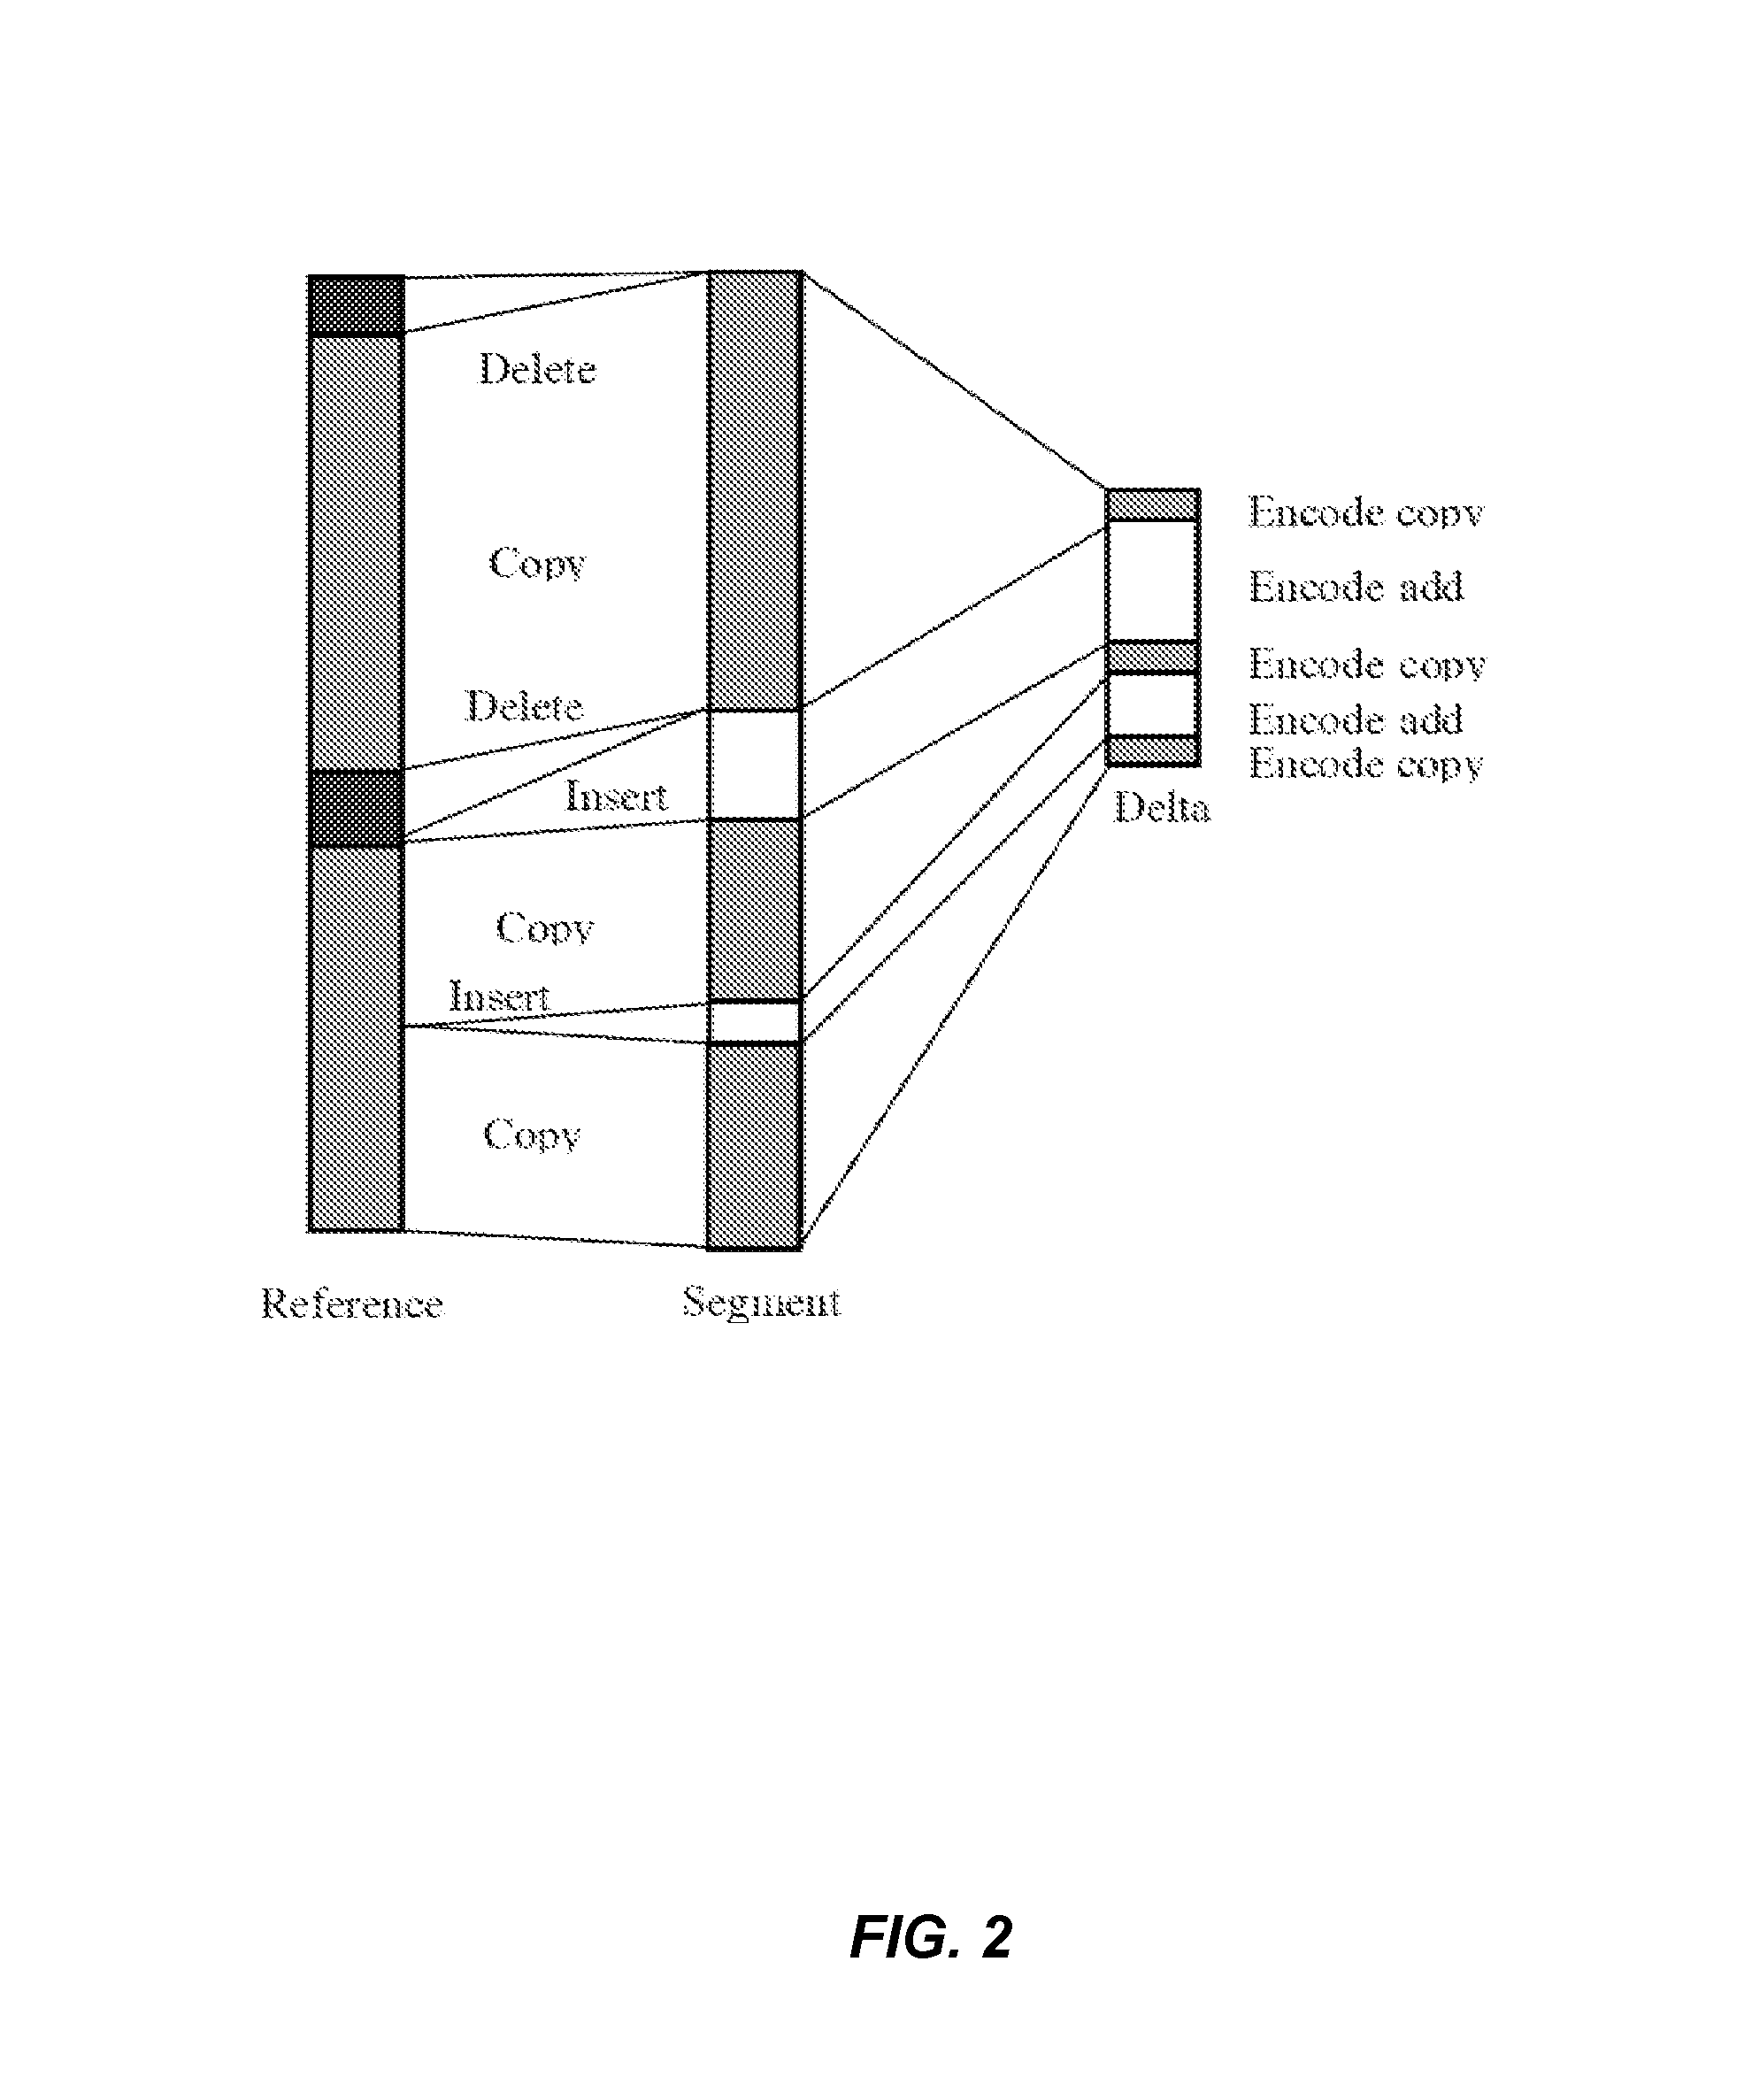 Methods and systems for compressing and comparing genomic data